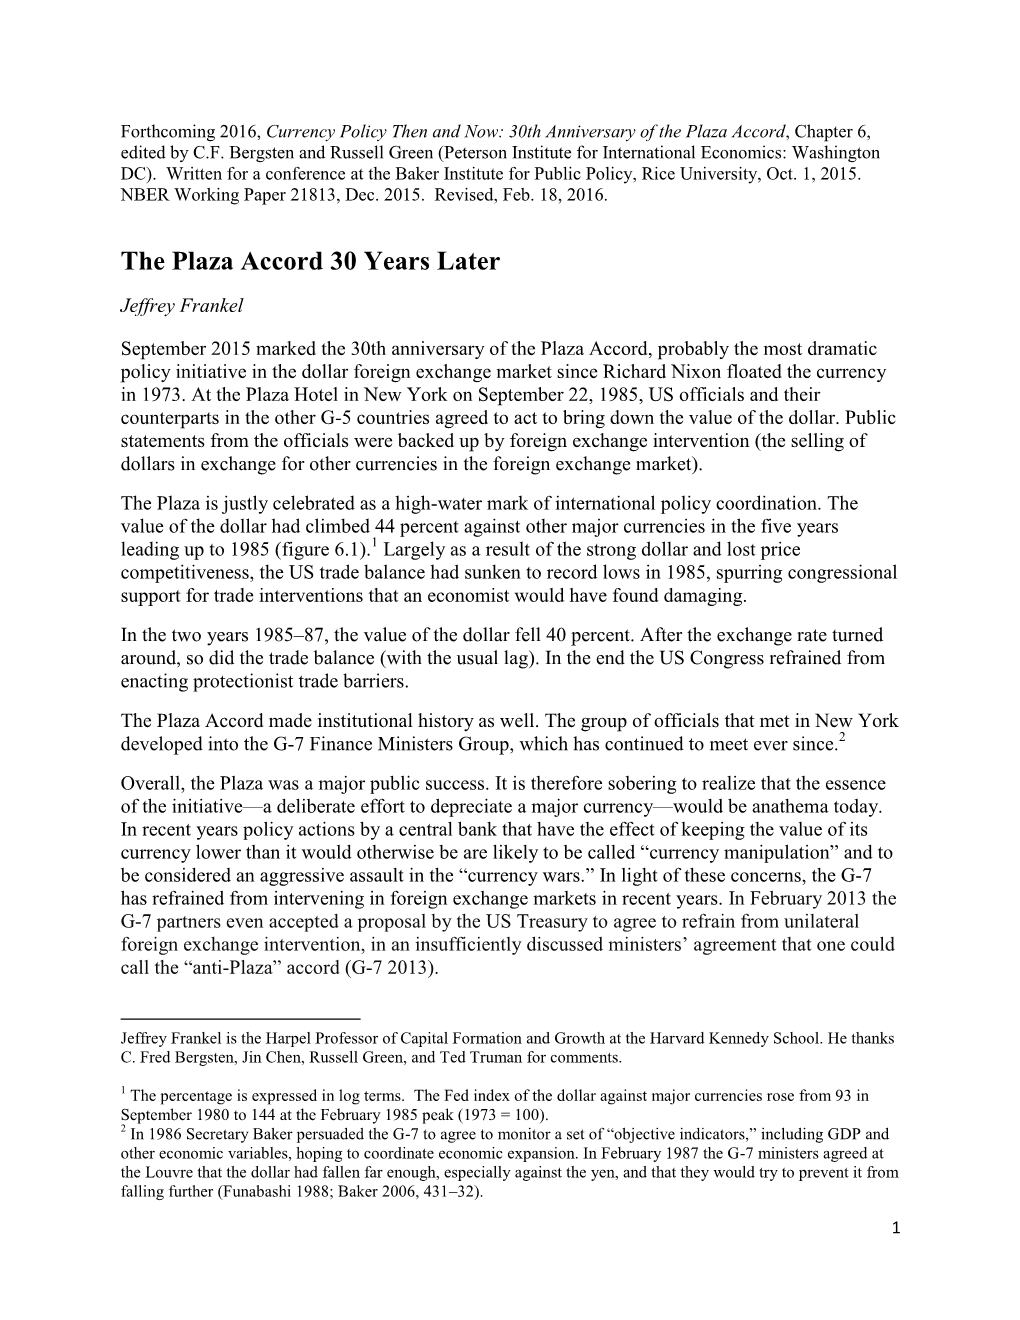 The Plaza Accord 30 Years Later